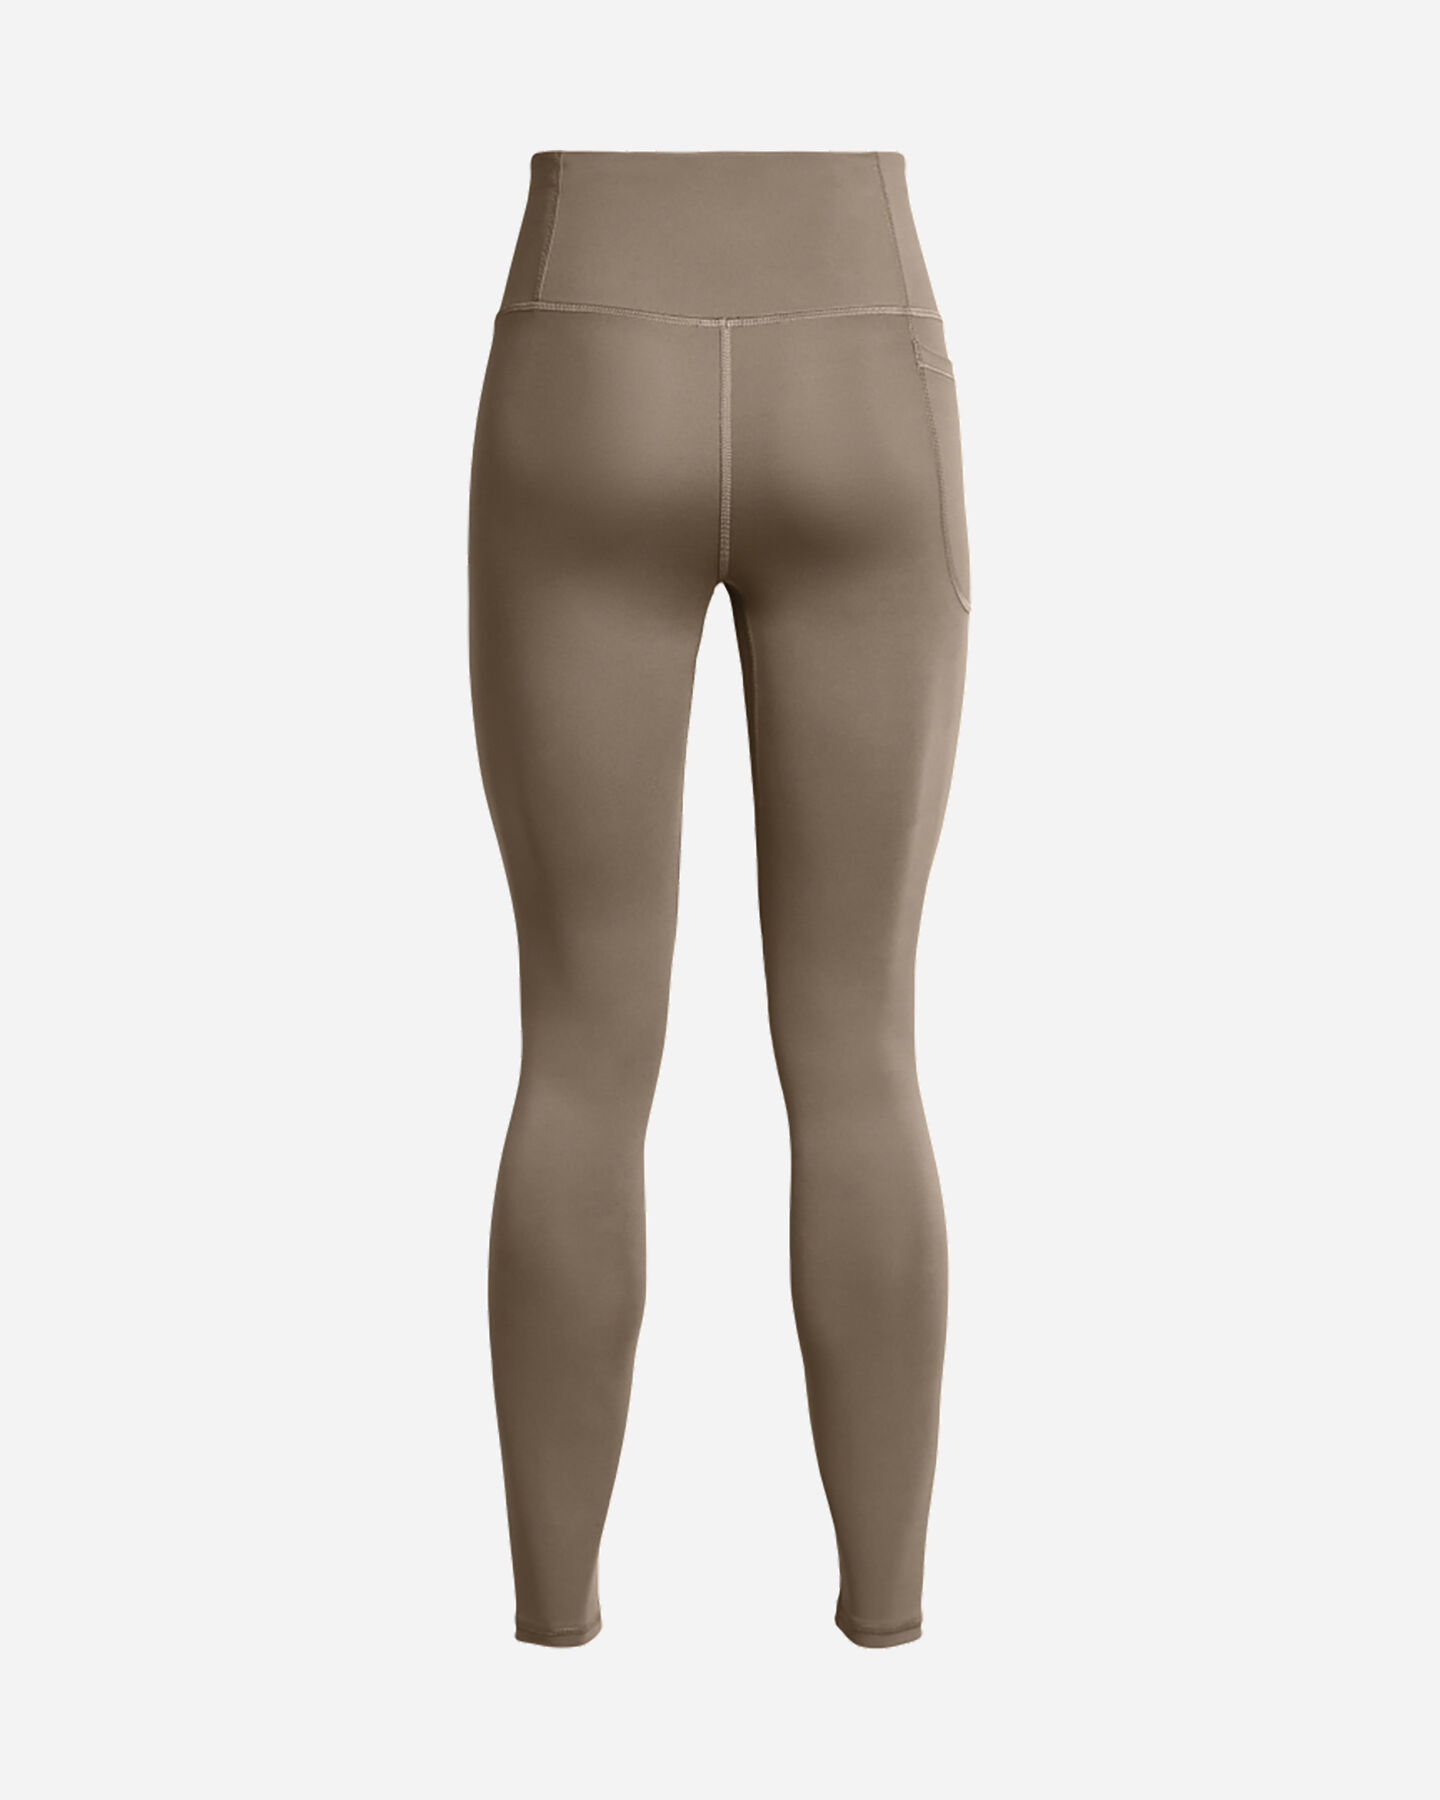  Leggings UNDER ARMOUR MOTION W S5640854|0200|XS scatto 1